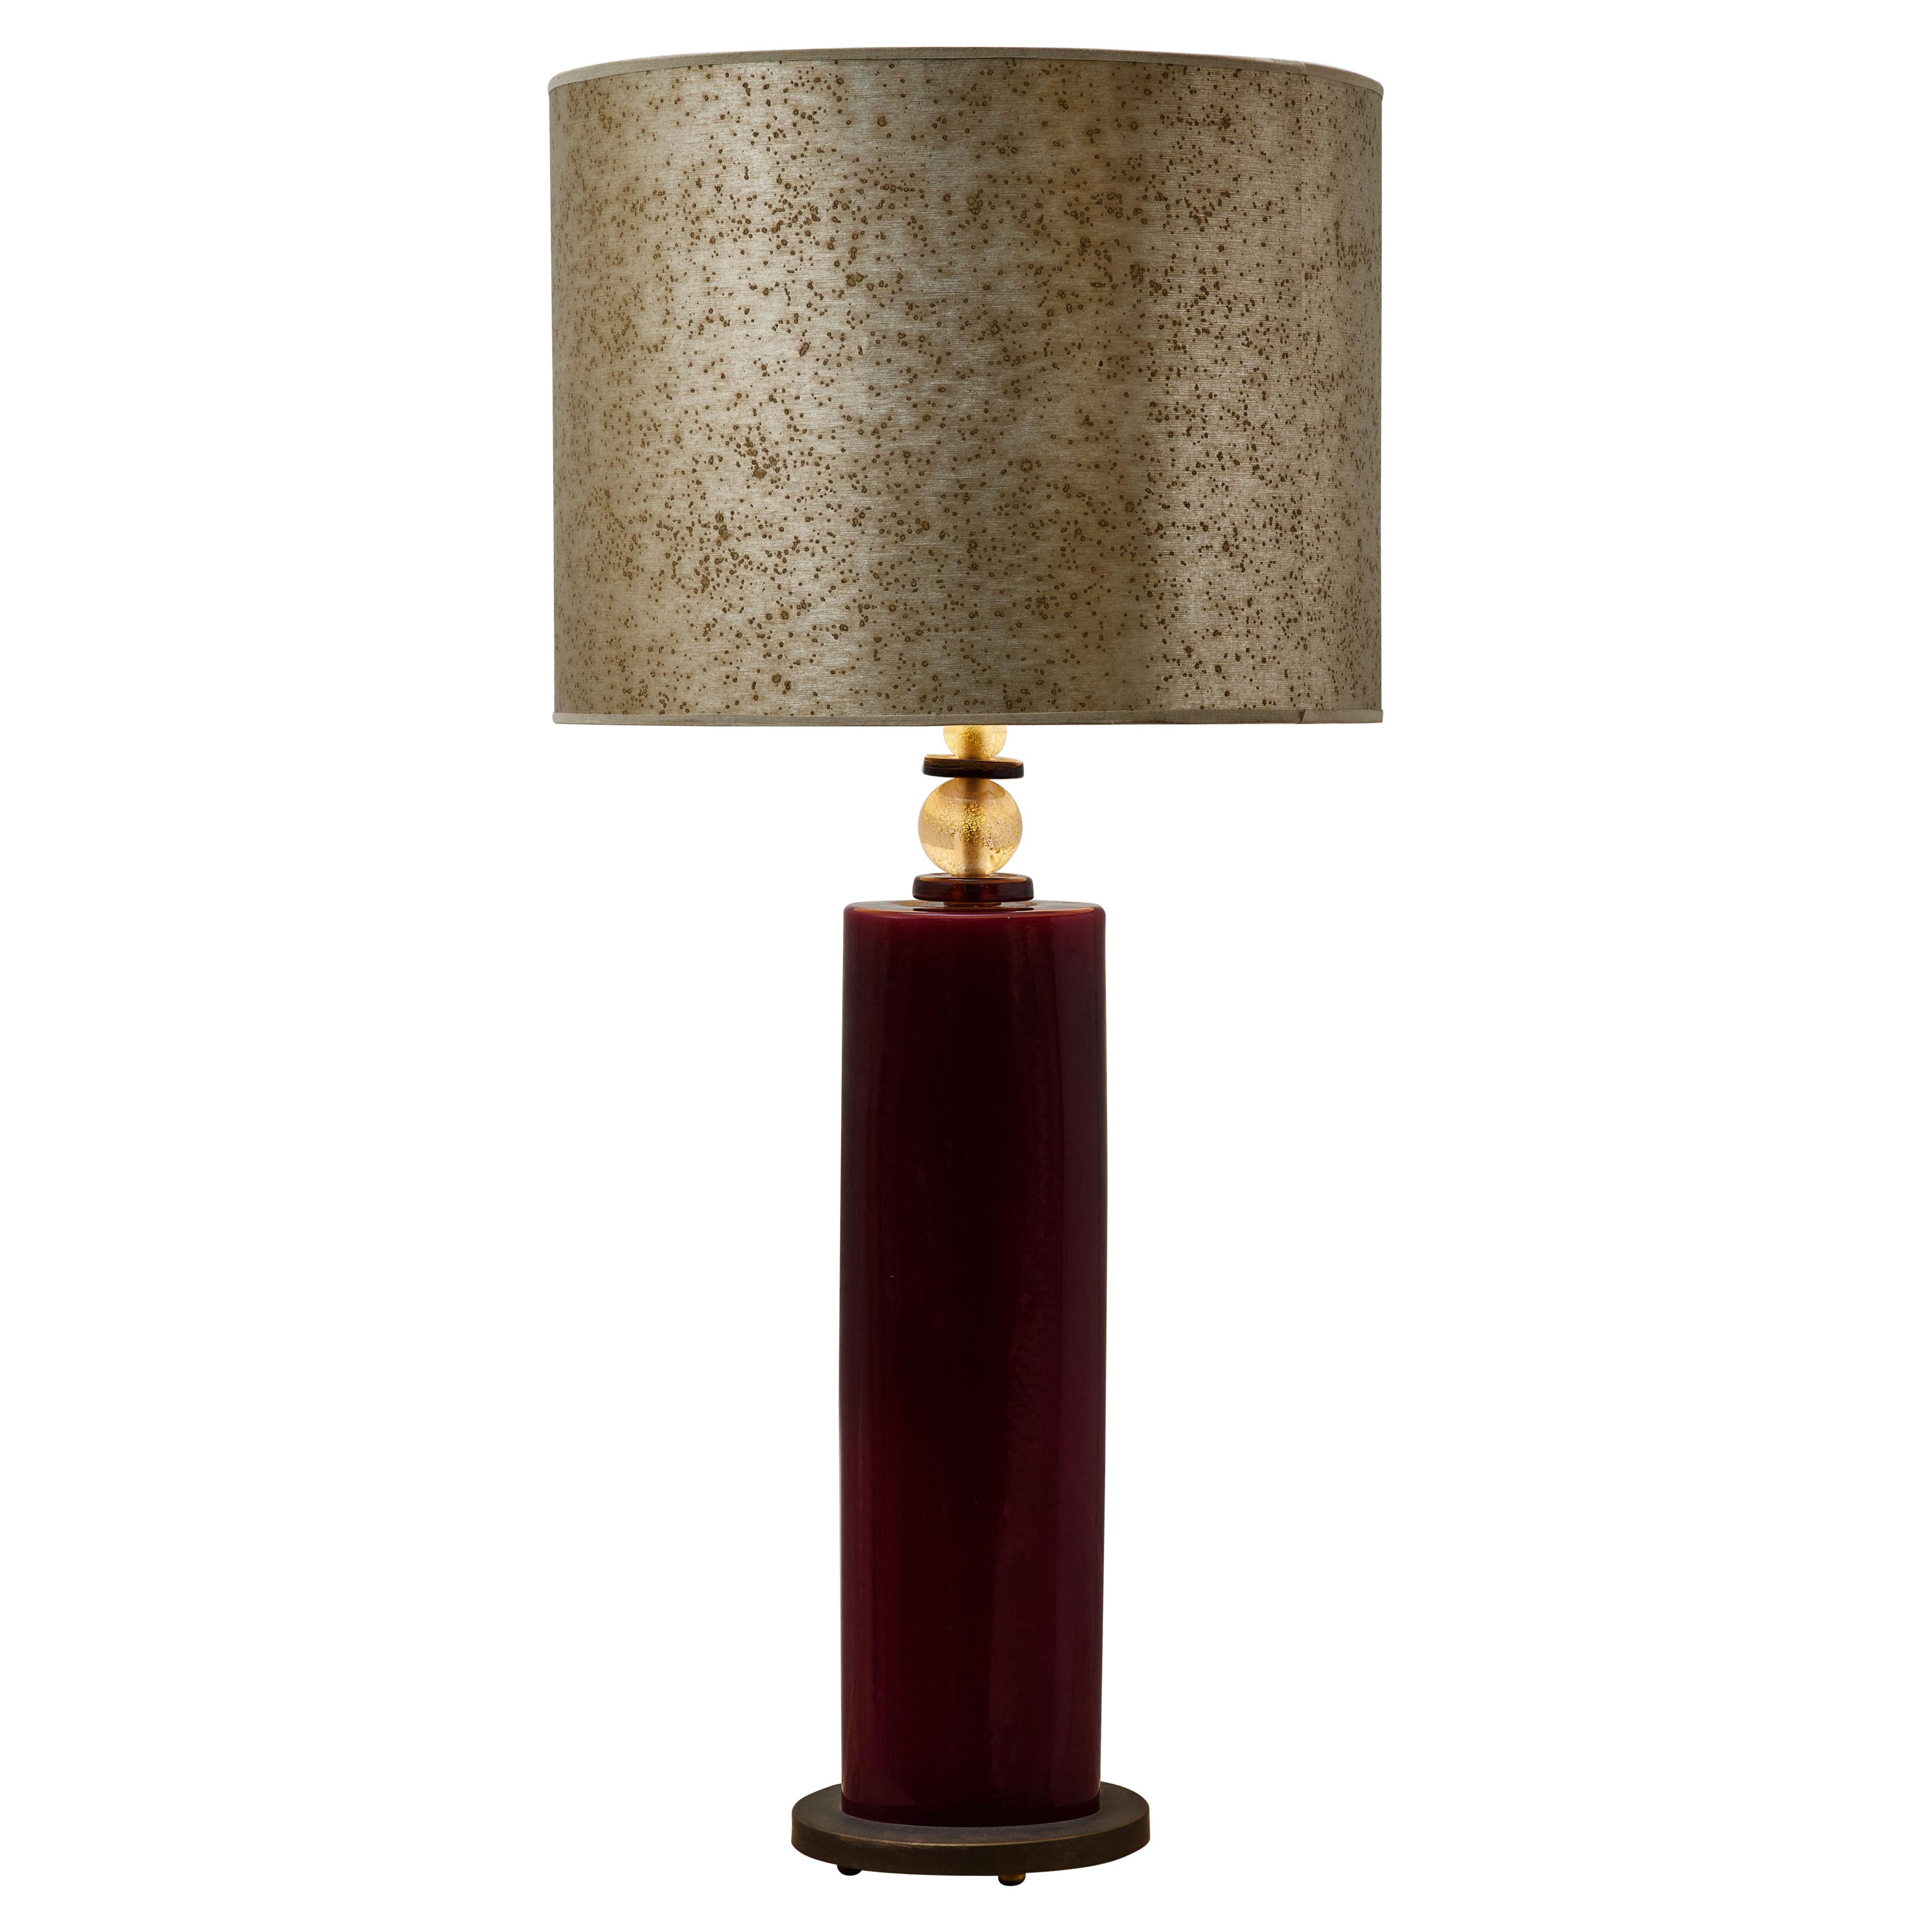 Vintage burgundy red Murano Glass Lamp at Cost Price For Sale